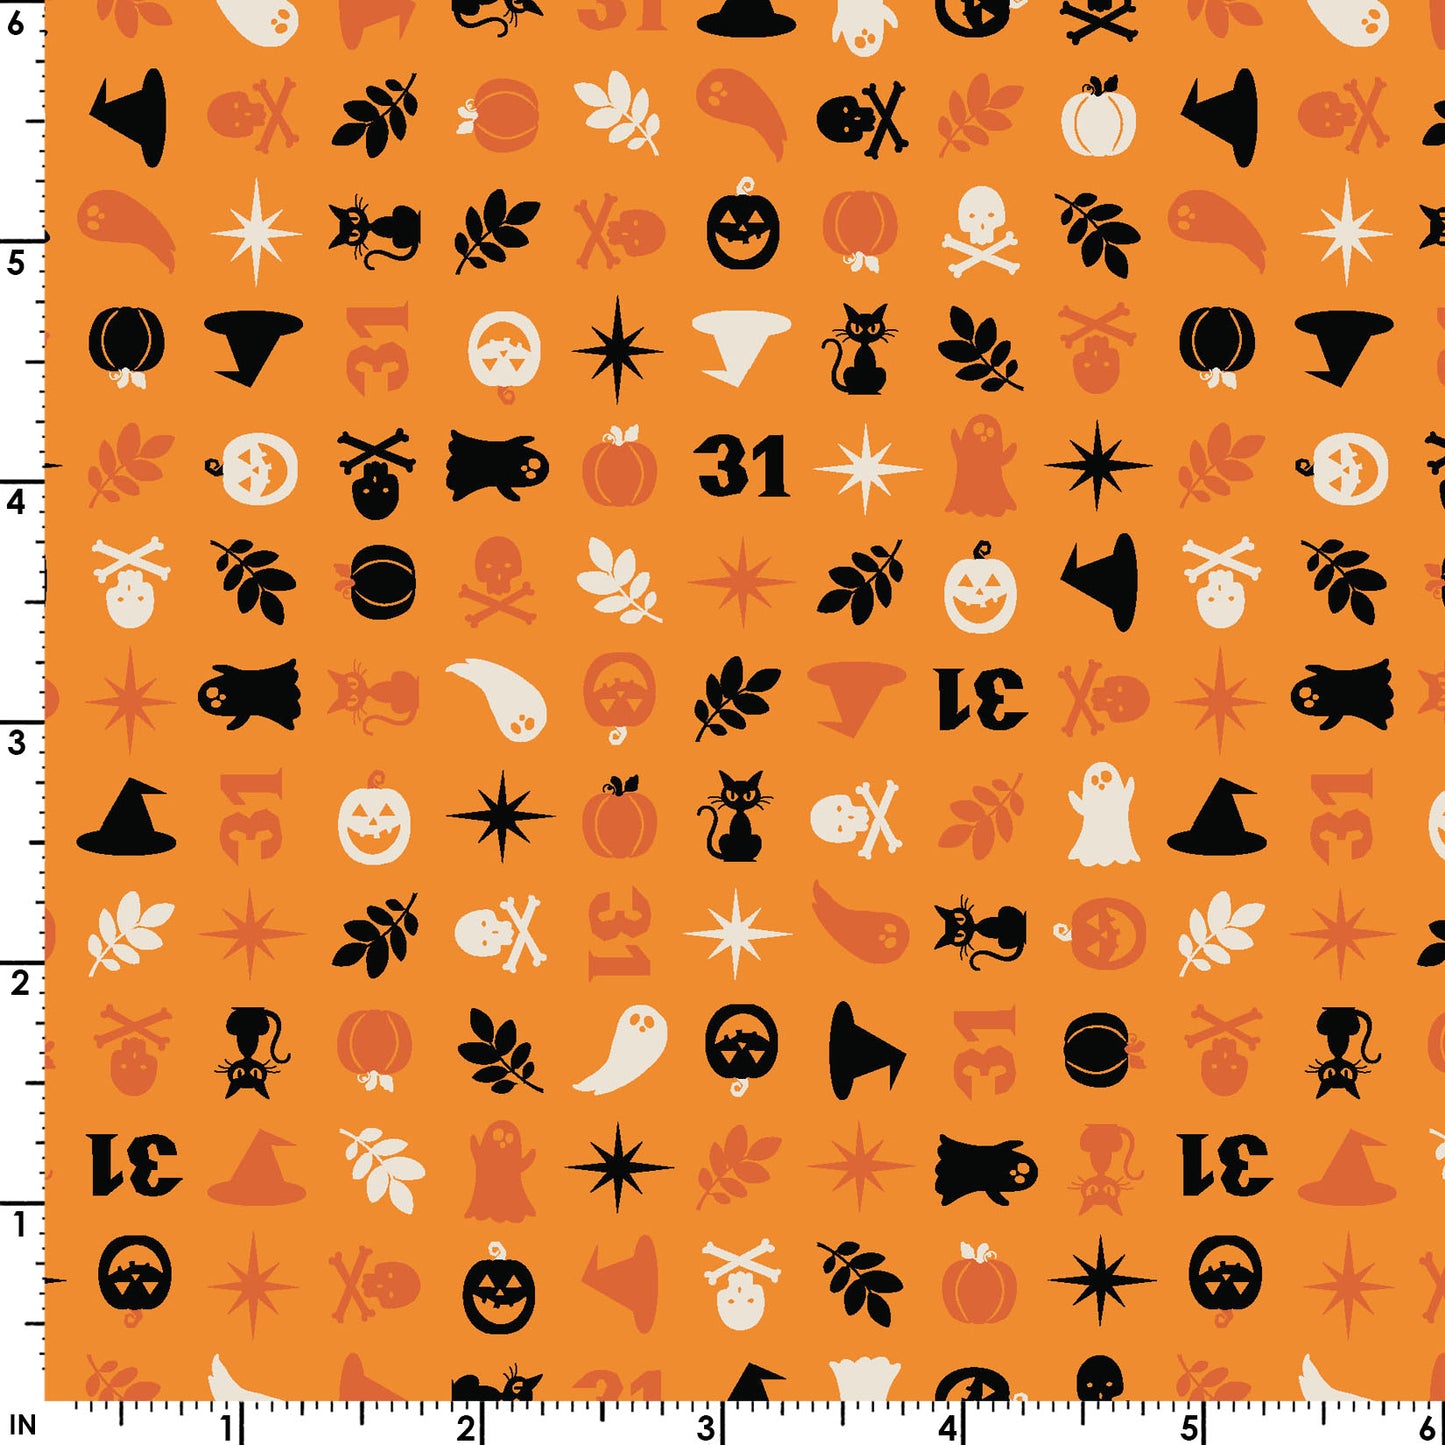 The Halloween Charms print in orange (MAS10573-O) from the Pumpkin and Potions line by Kimberbell for Maywood Studio features pumpkins, witch hats, ghosts, cats, spiders and more. Photo shows details of the designs with a ruler to show the scale.